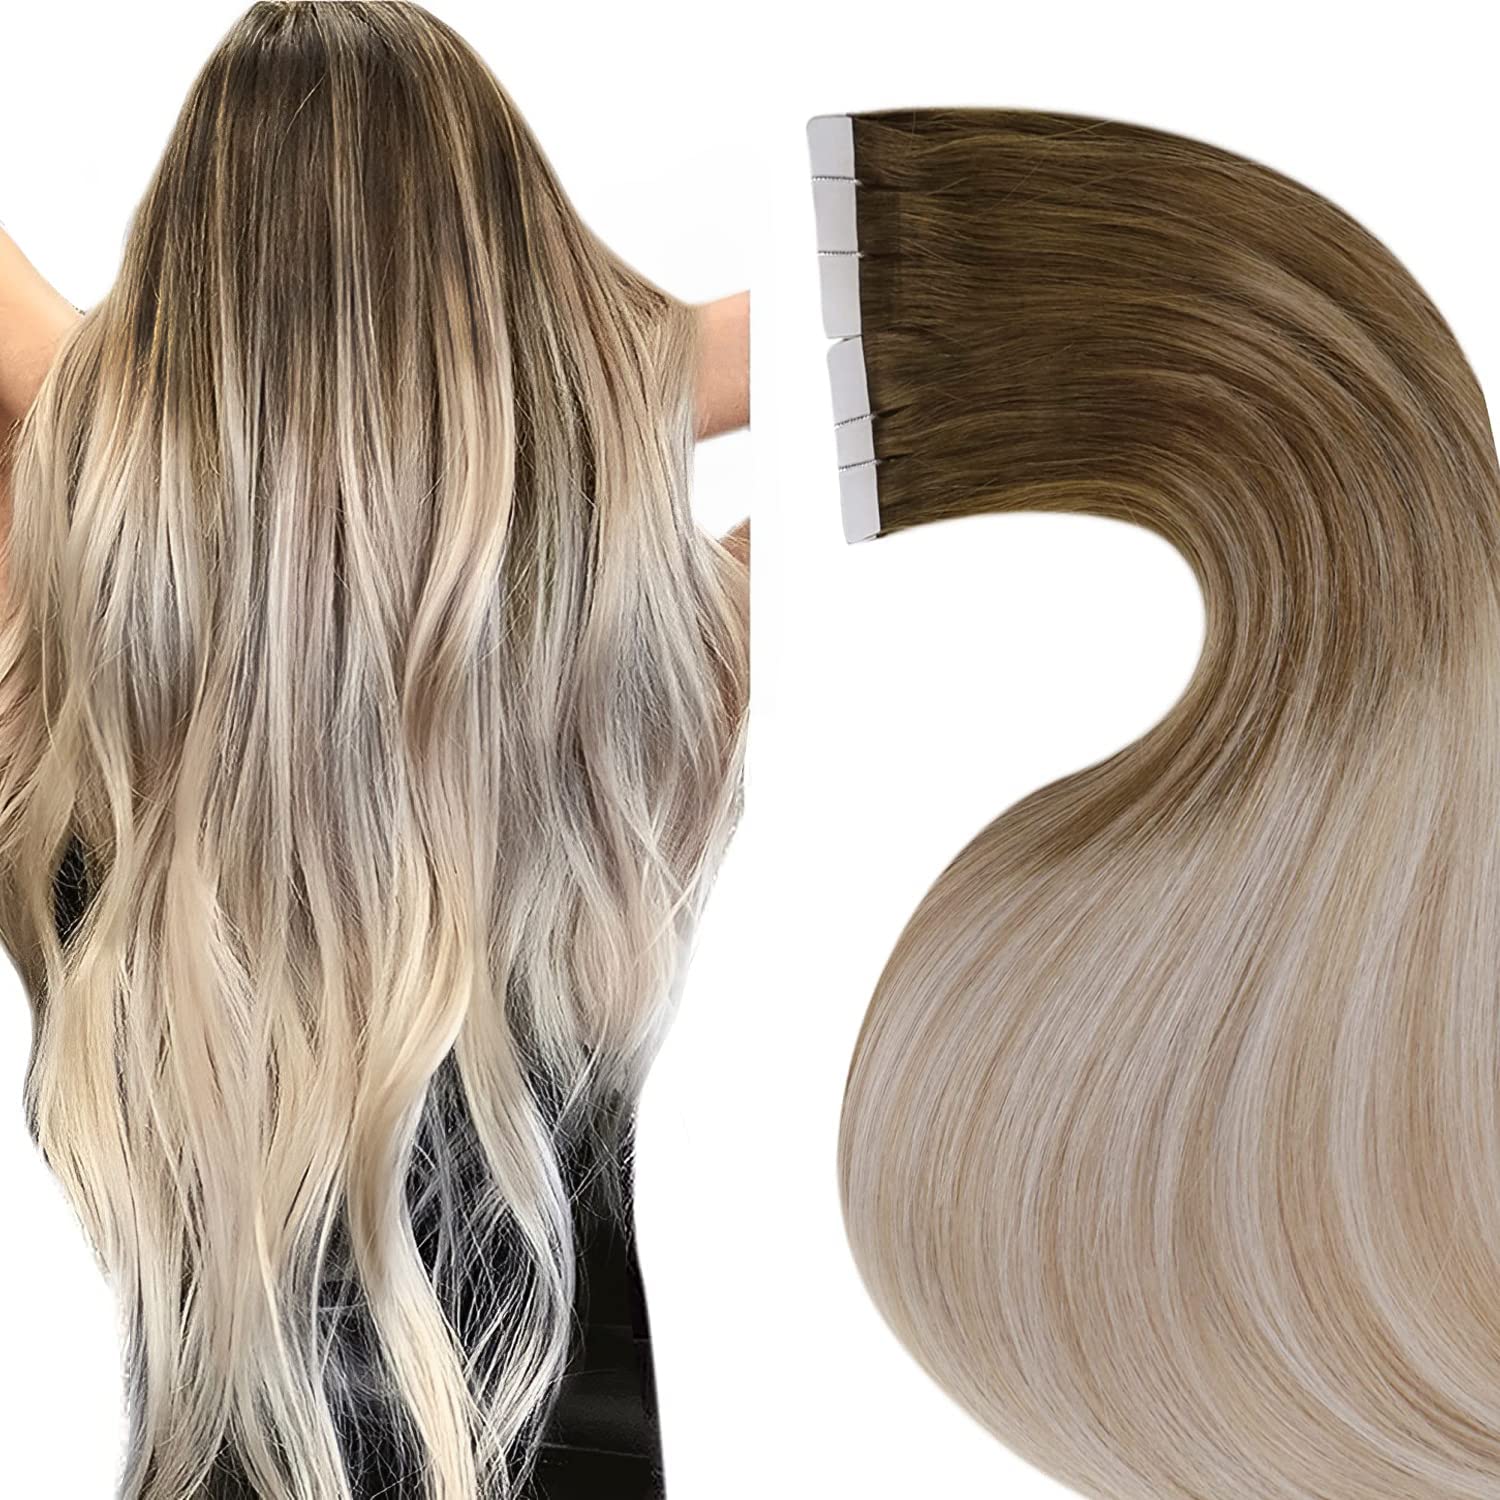 LaaVoo Tape in Hair Extensions Human Hair Ombre Light [...]